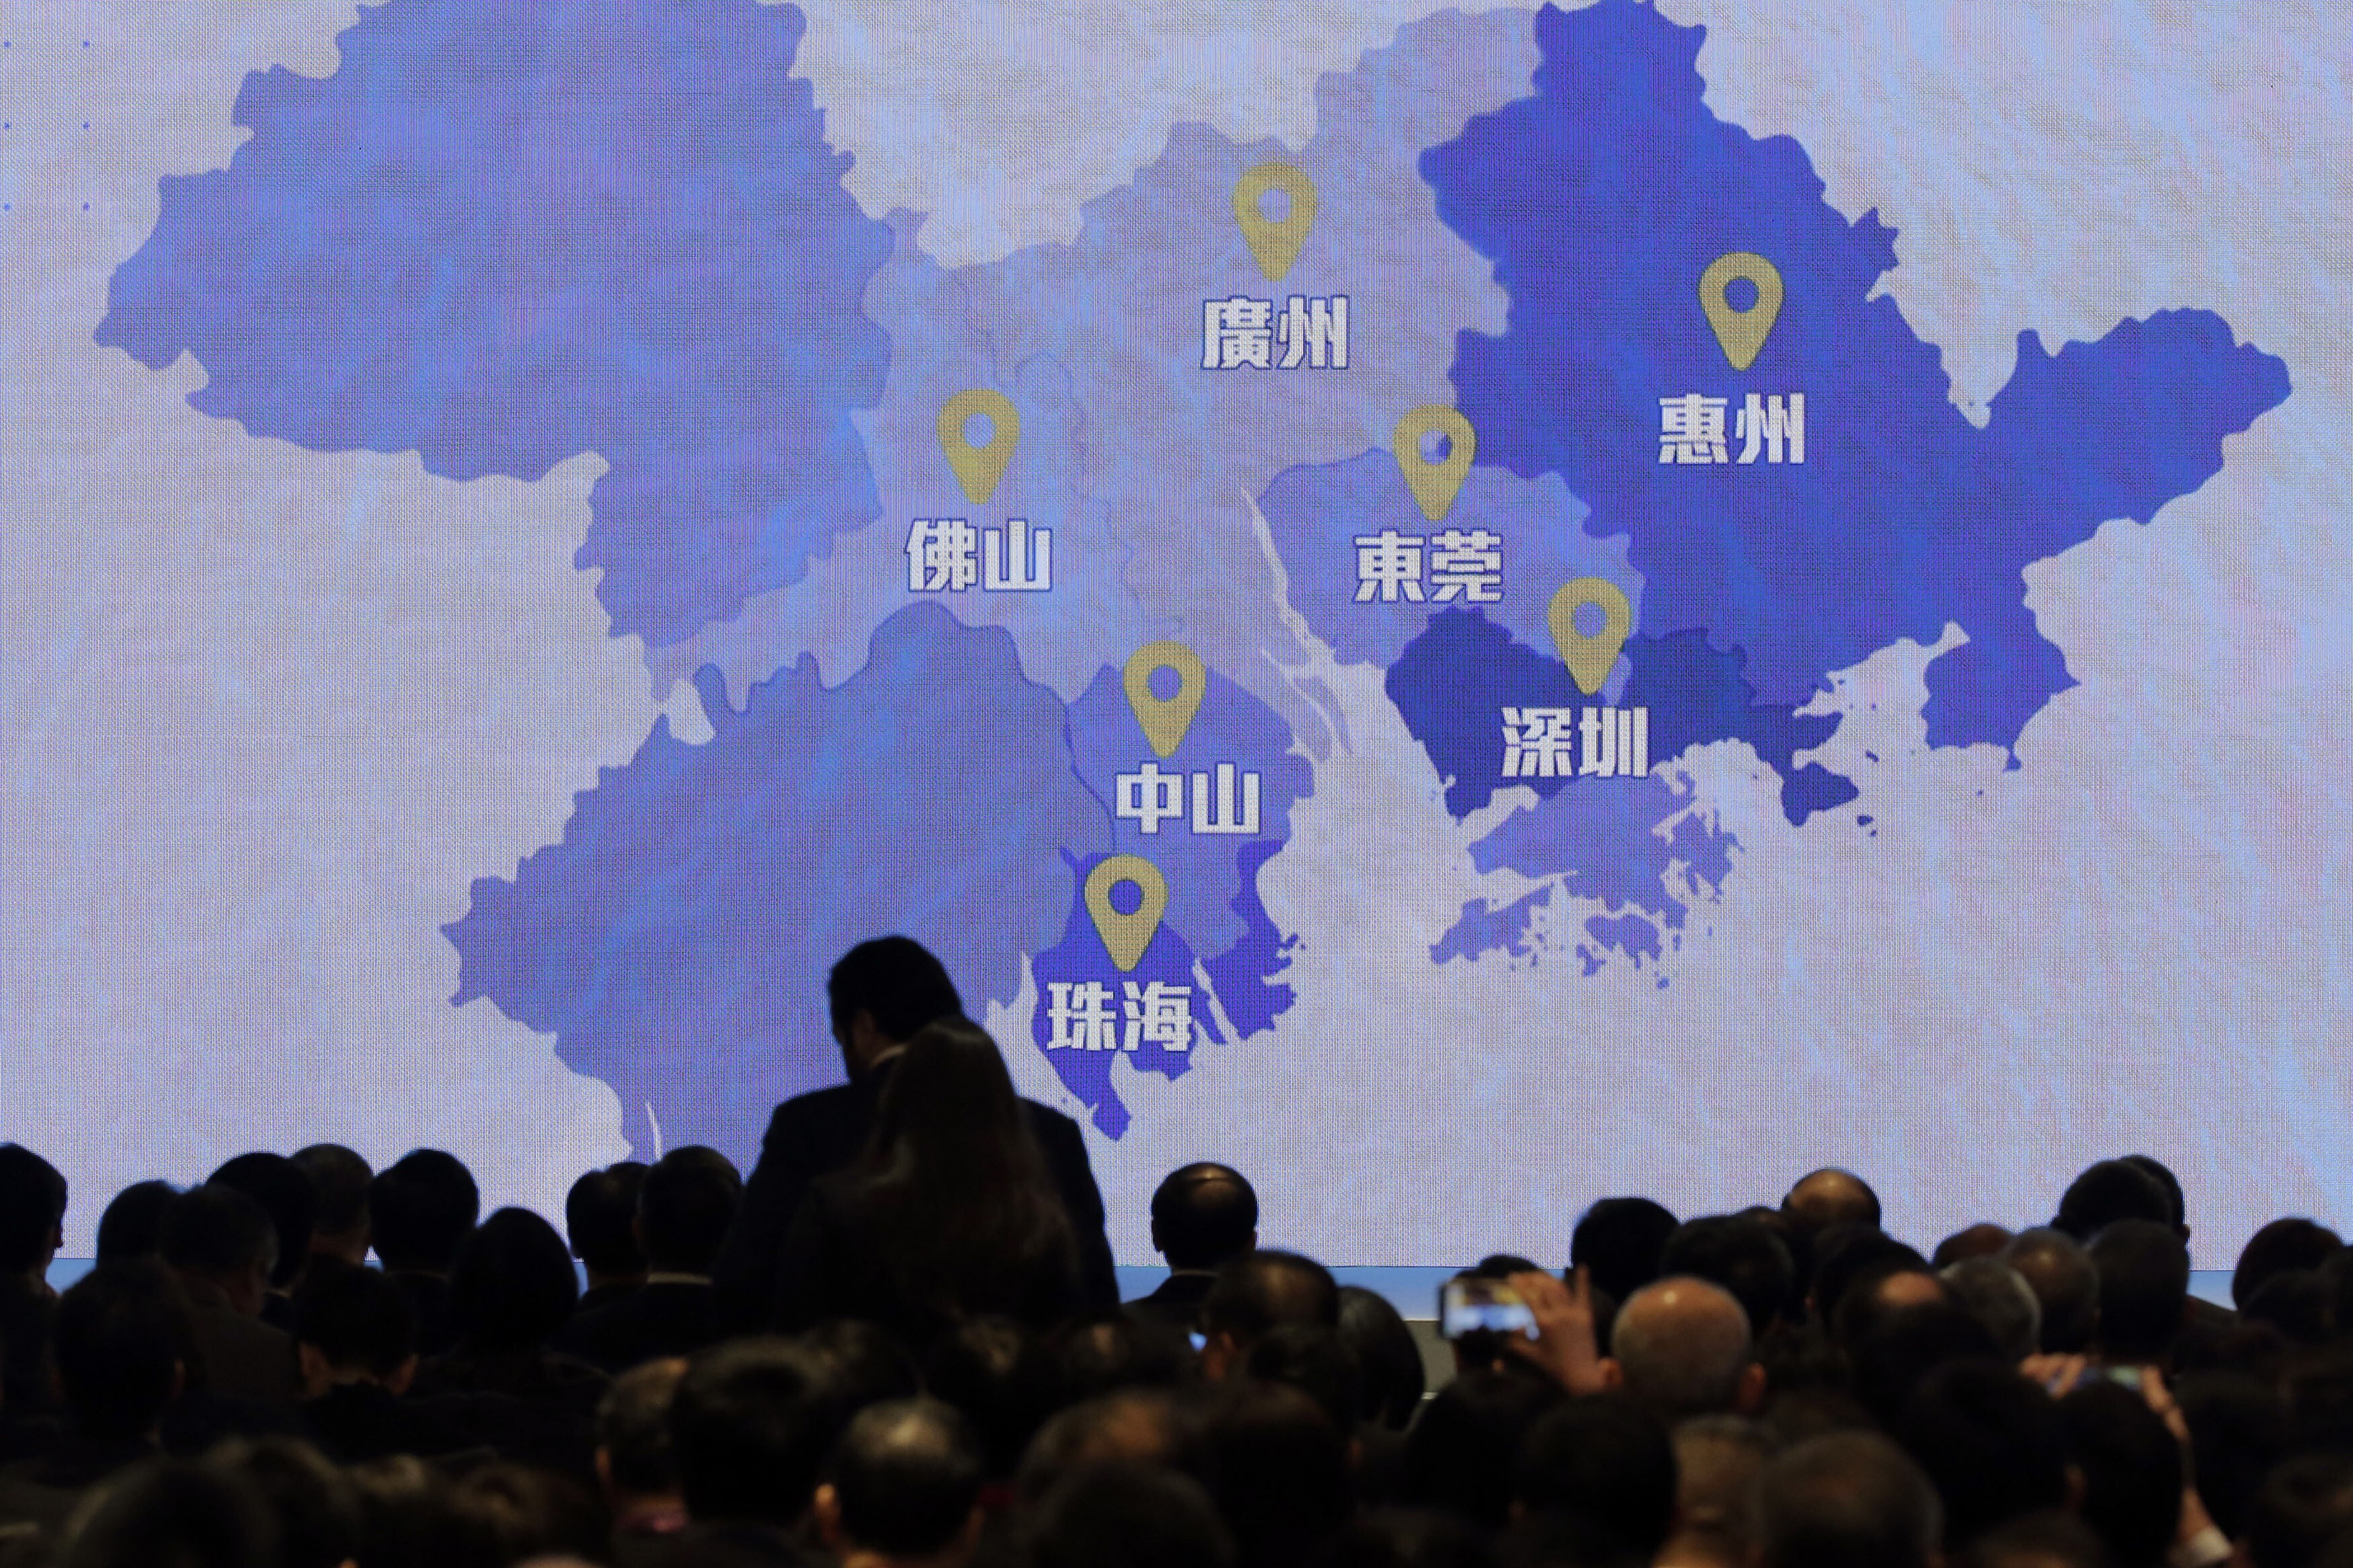 A screen shows a map of Greater Bay Area during a symposium on the "Outline Development Plan for the Guangdong-Hong Kong-Macao, Greater Bay Area" in Hong Kong on Thursday, February 21, 2019. Photo: AP